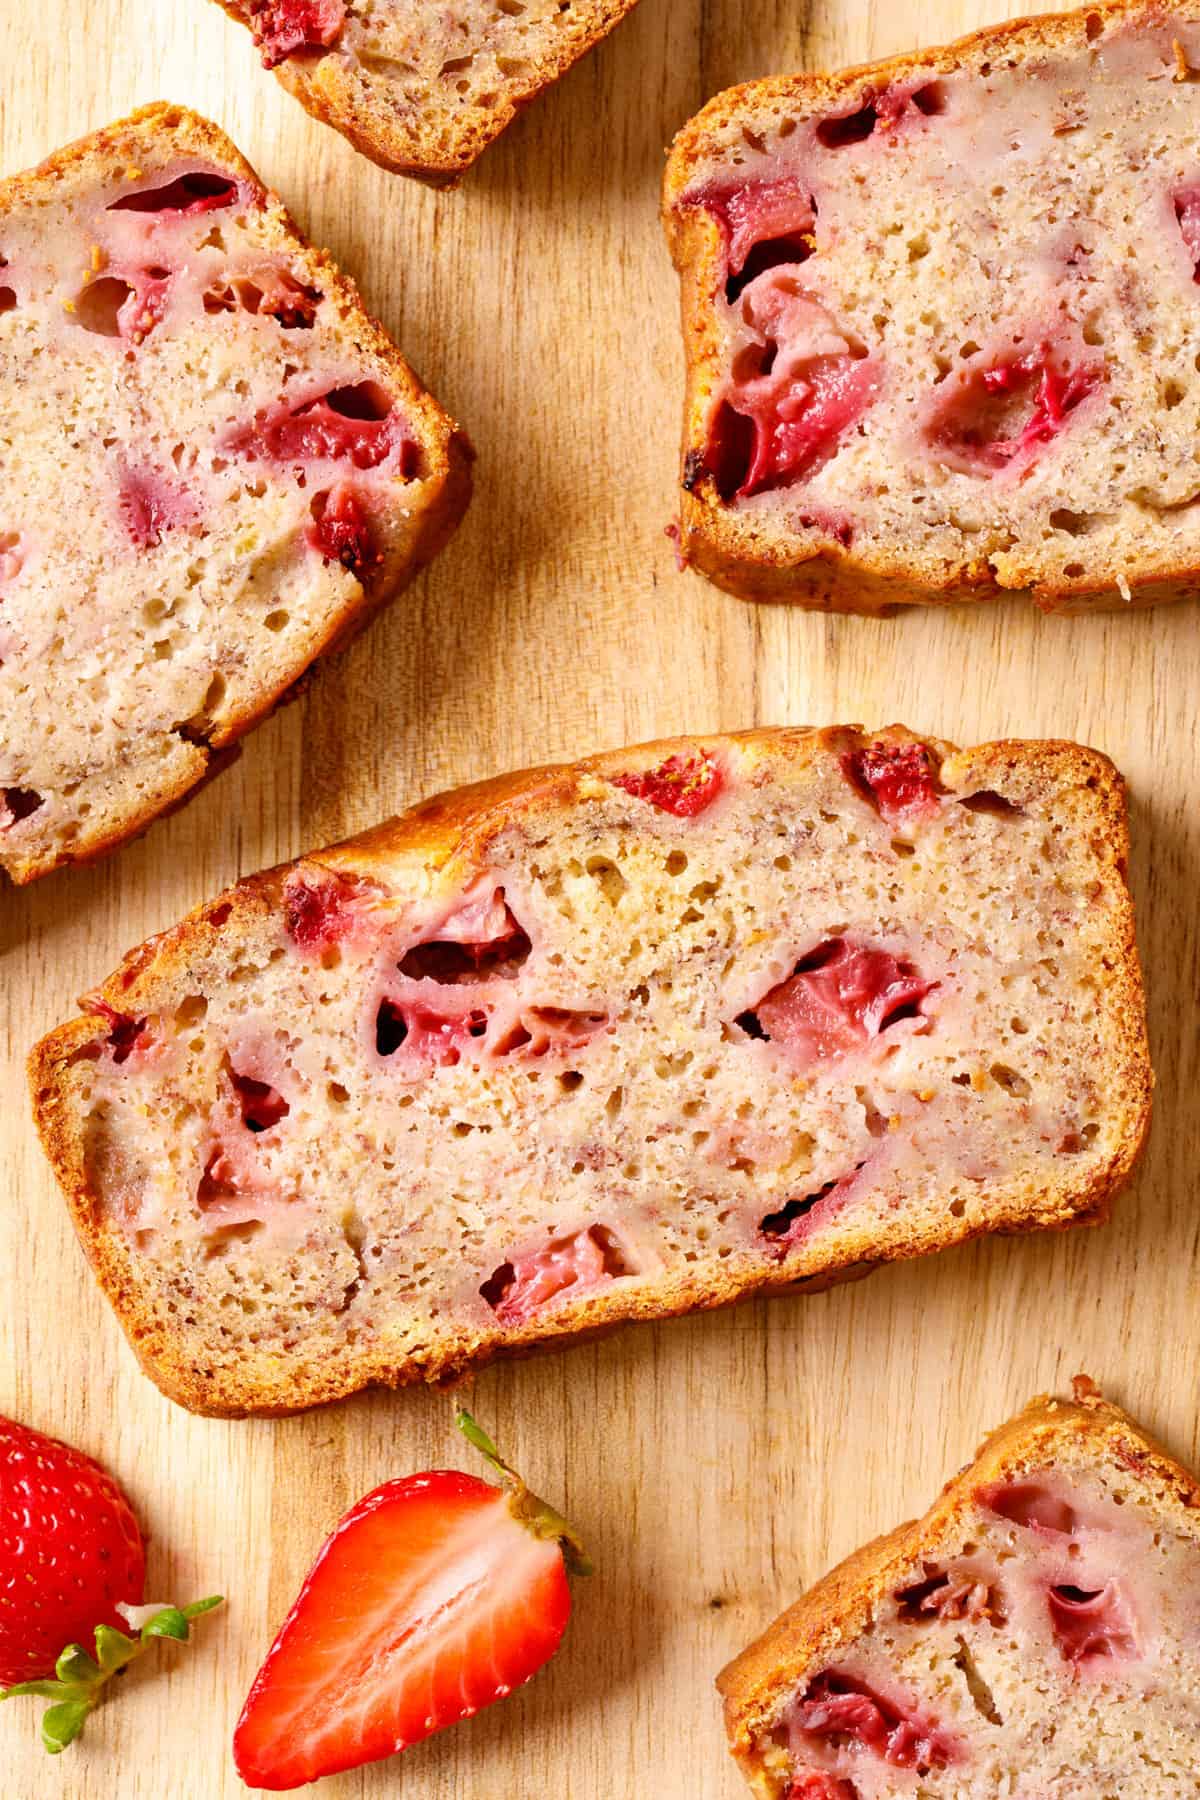 Top down image of slices of strawberry banana bread sitting on a wood cutting board with fresh cut strawberries surrounding.